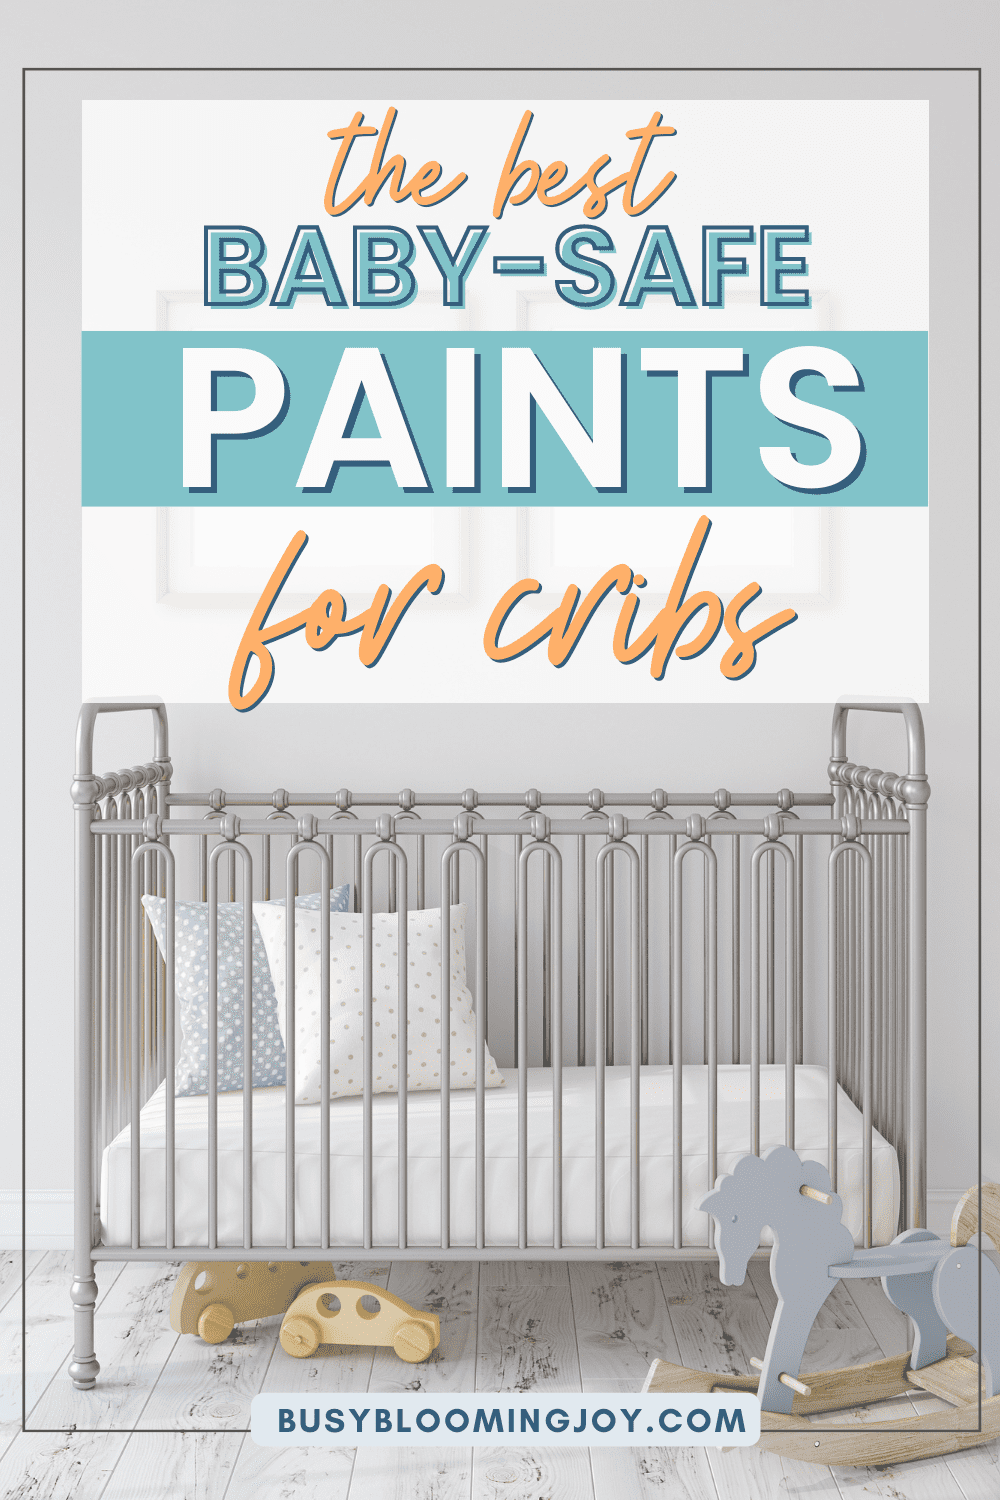 13 Best non-toxic safe paints for your baby’s crib in 2022